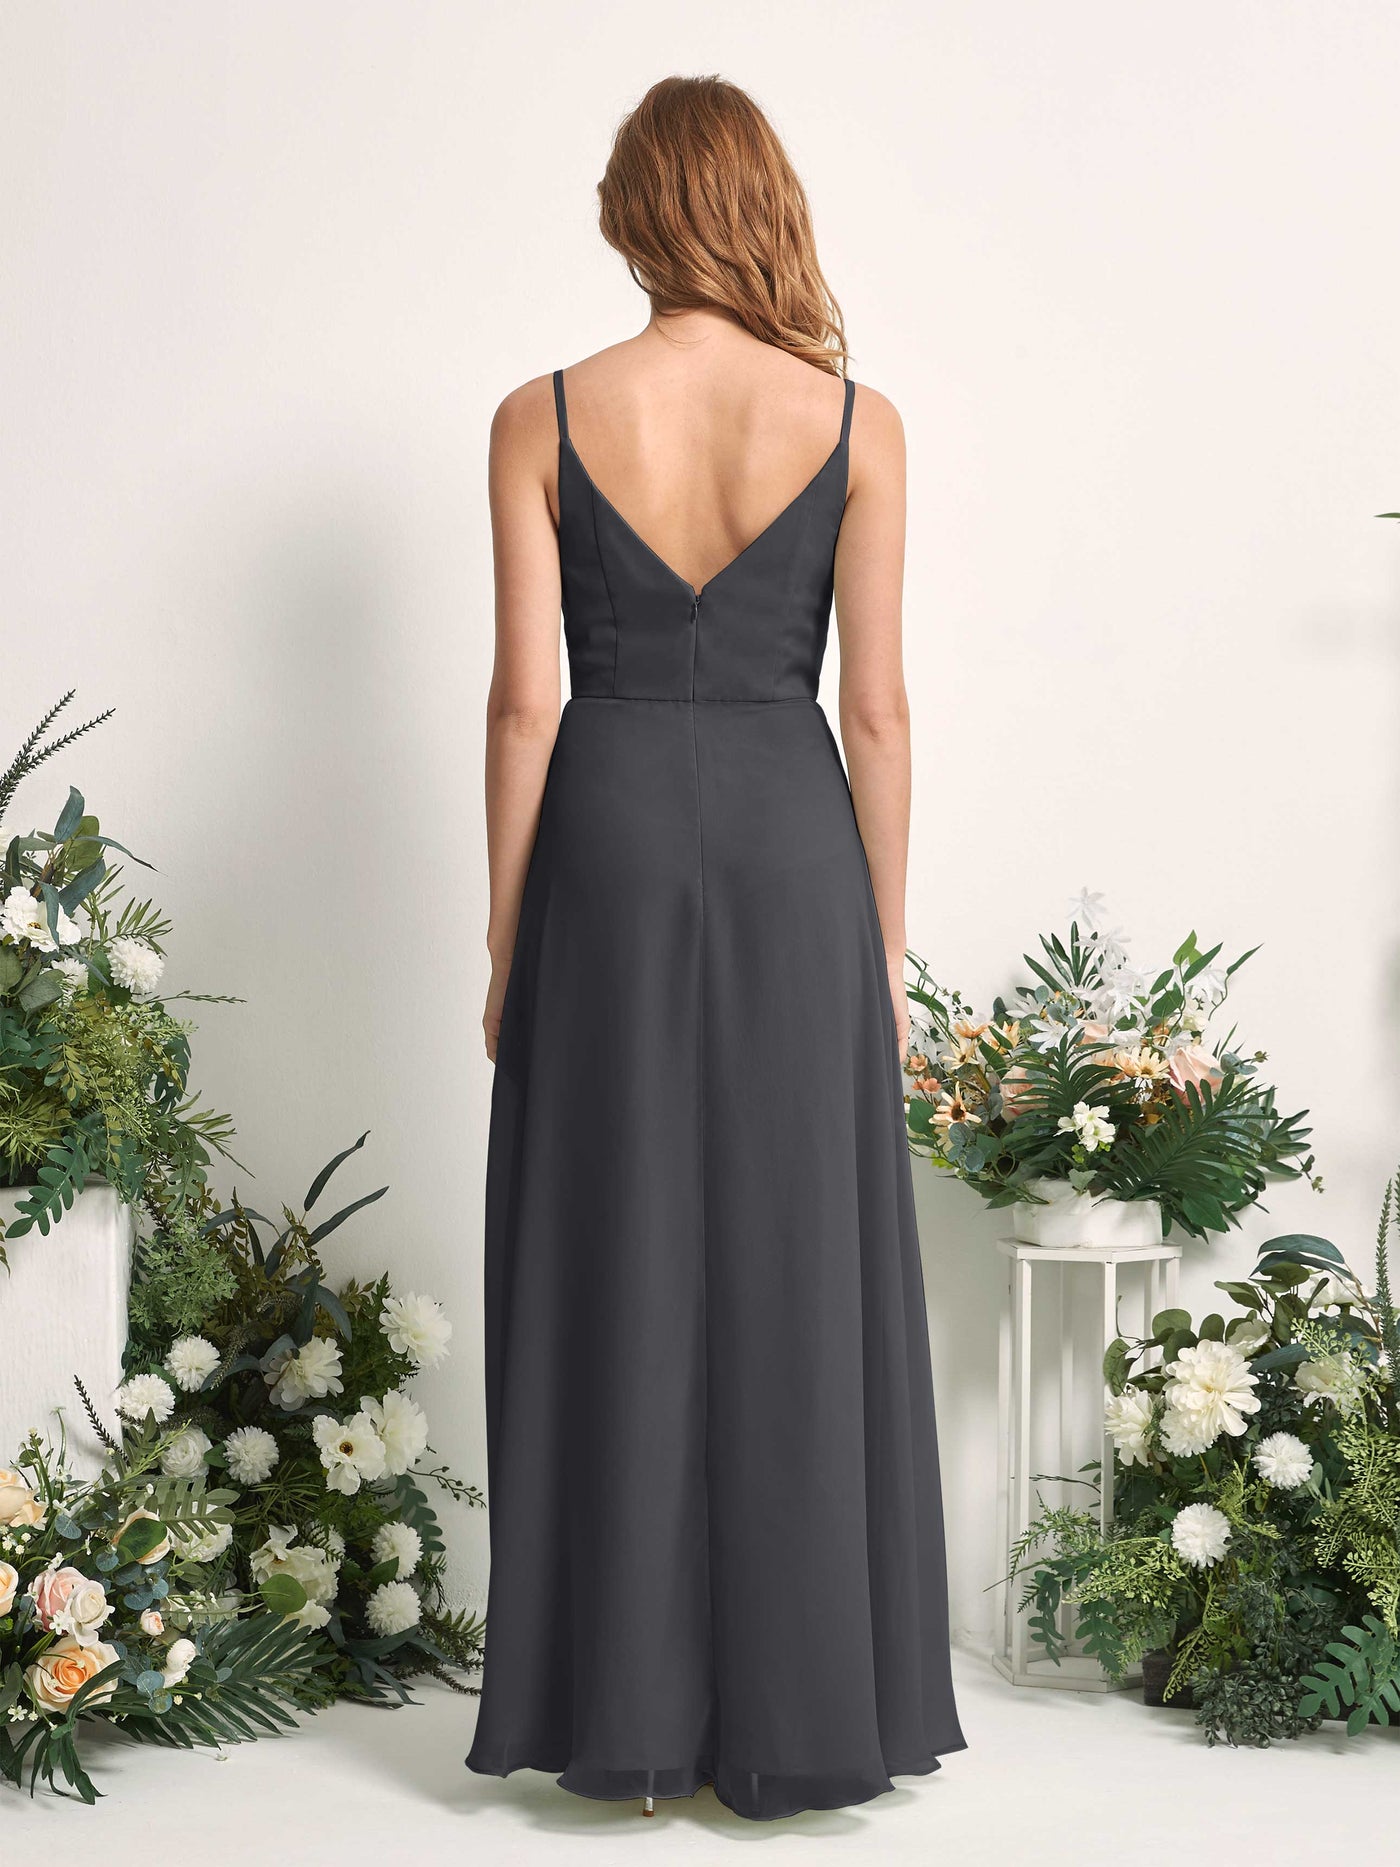 Bridesmaid Dress A-line Chiffon Spaghetti-straps Full Length Sleeveless Wedding Party Dress - Pewter (81227238)#color_pewter